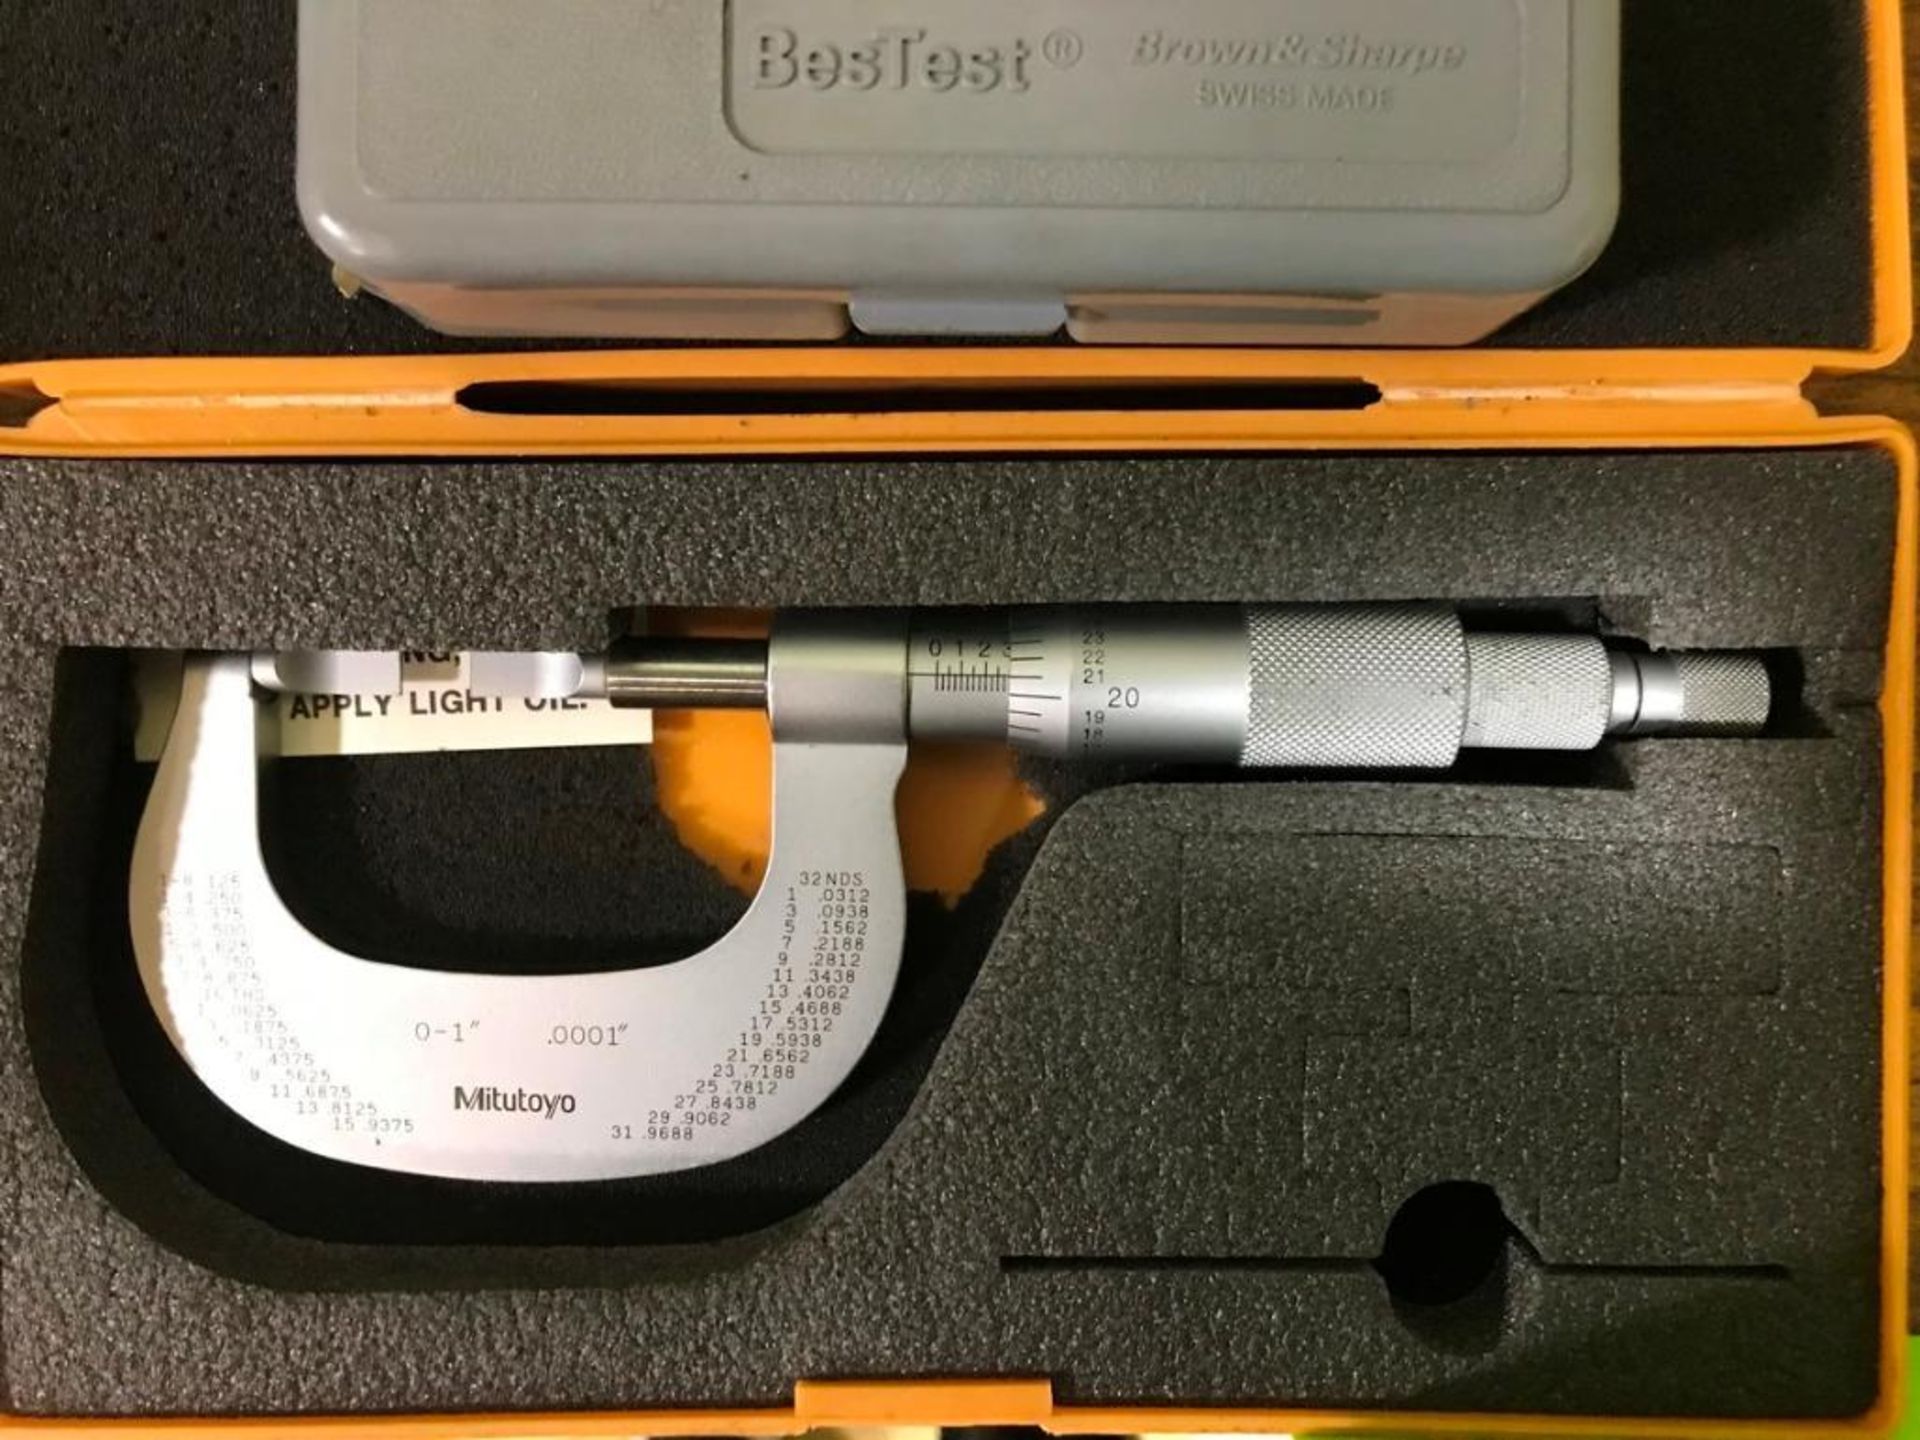 Mitutoyo, Blade Micrometer Ranging From (0-1'') - Image 2 of 3